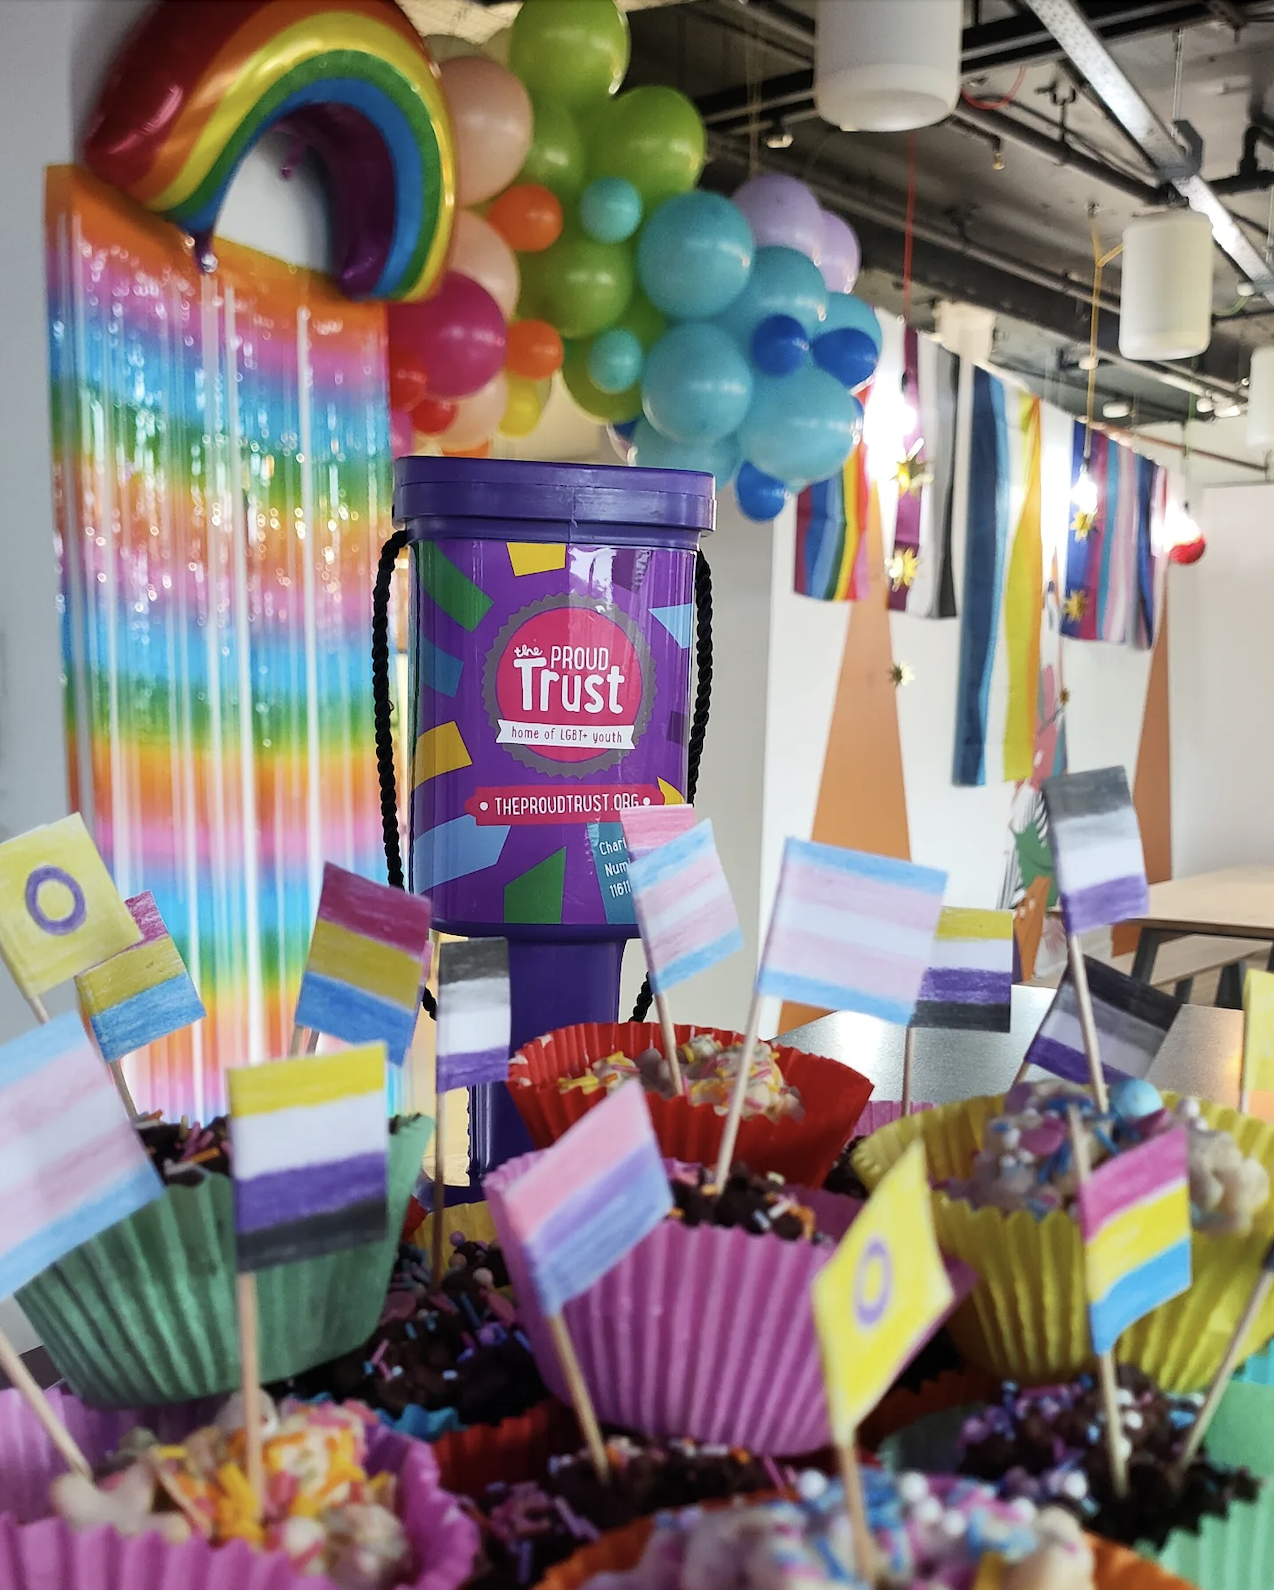 Pride celebration in our Manchester office with cakes and fundraising for The Proud Trust